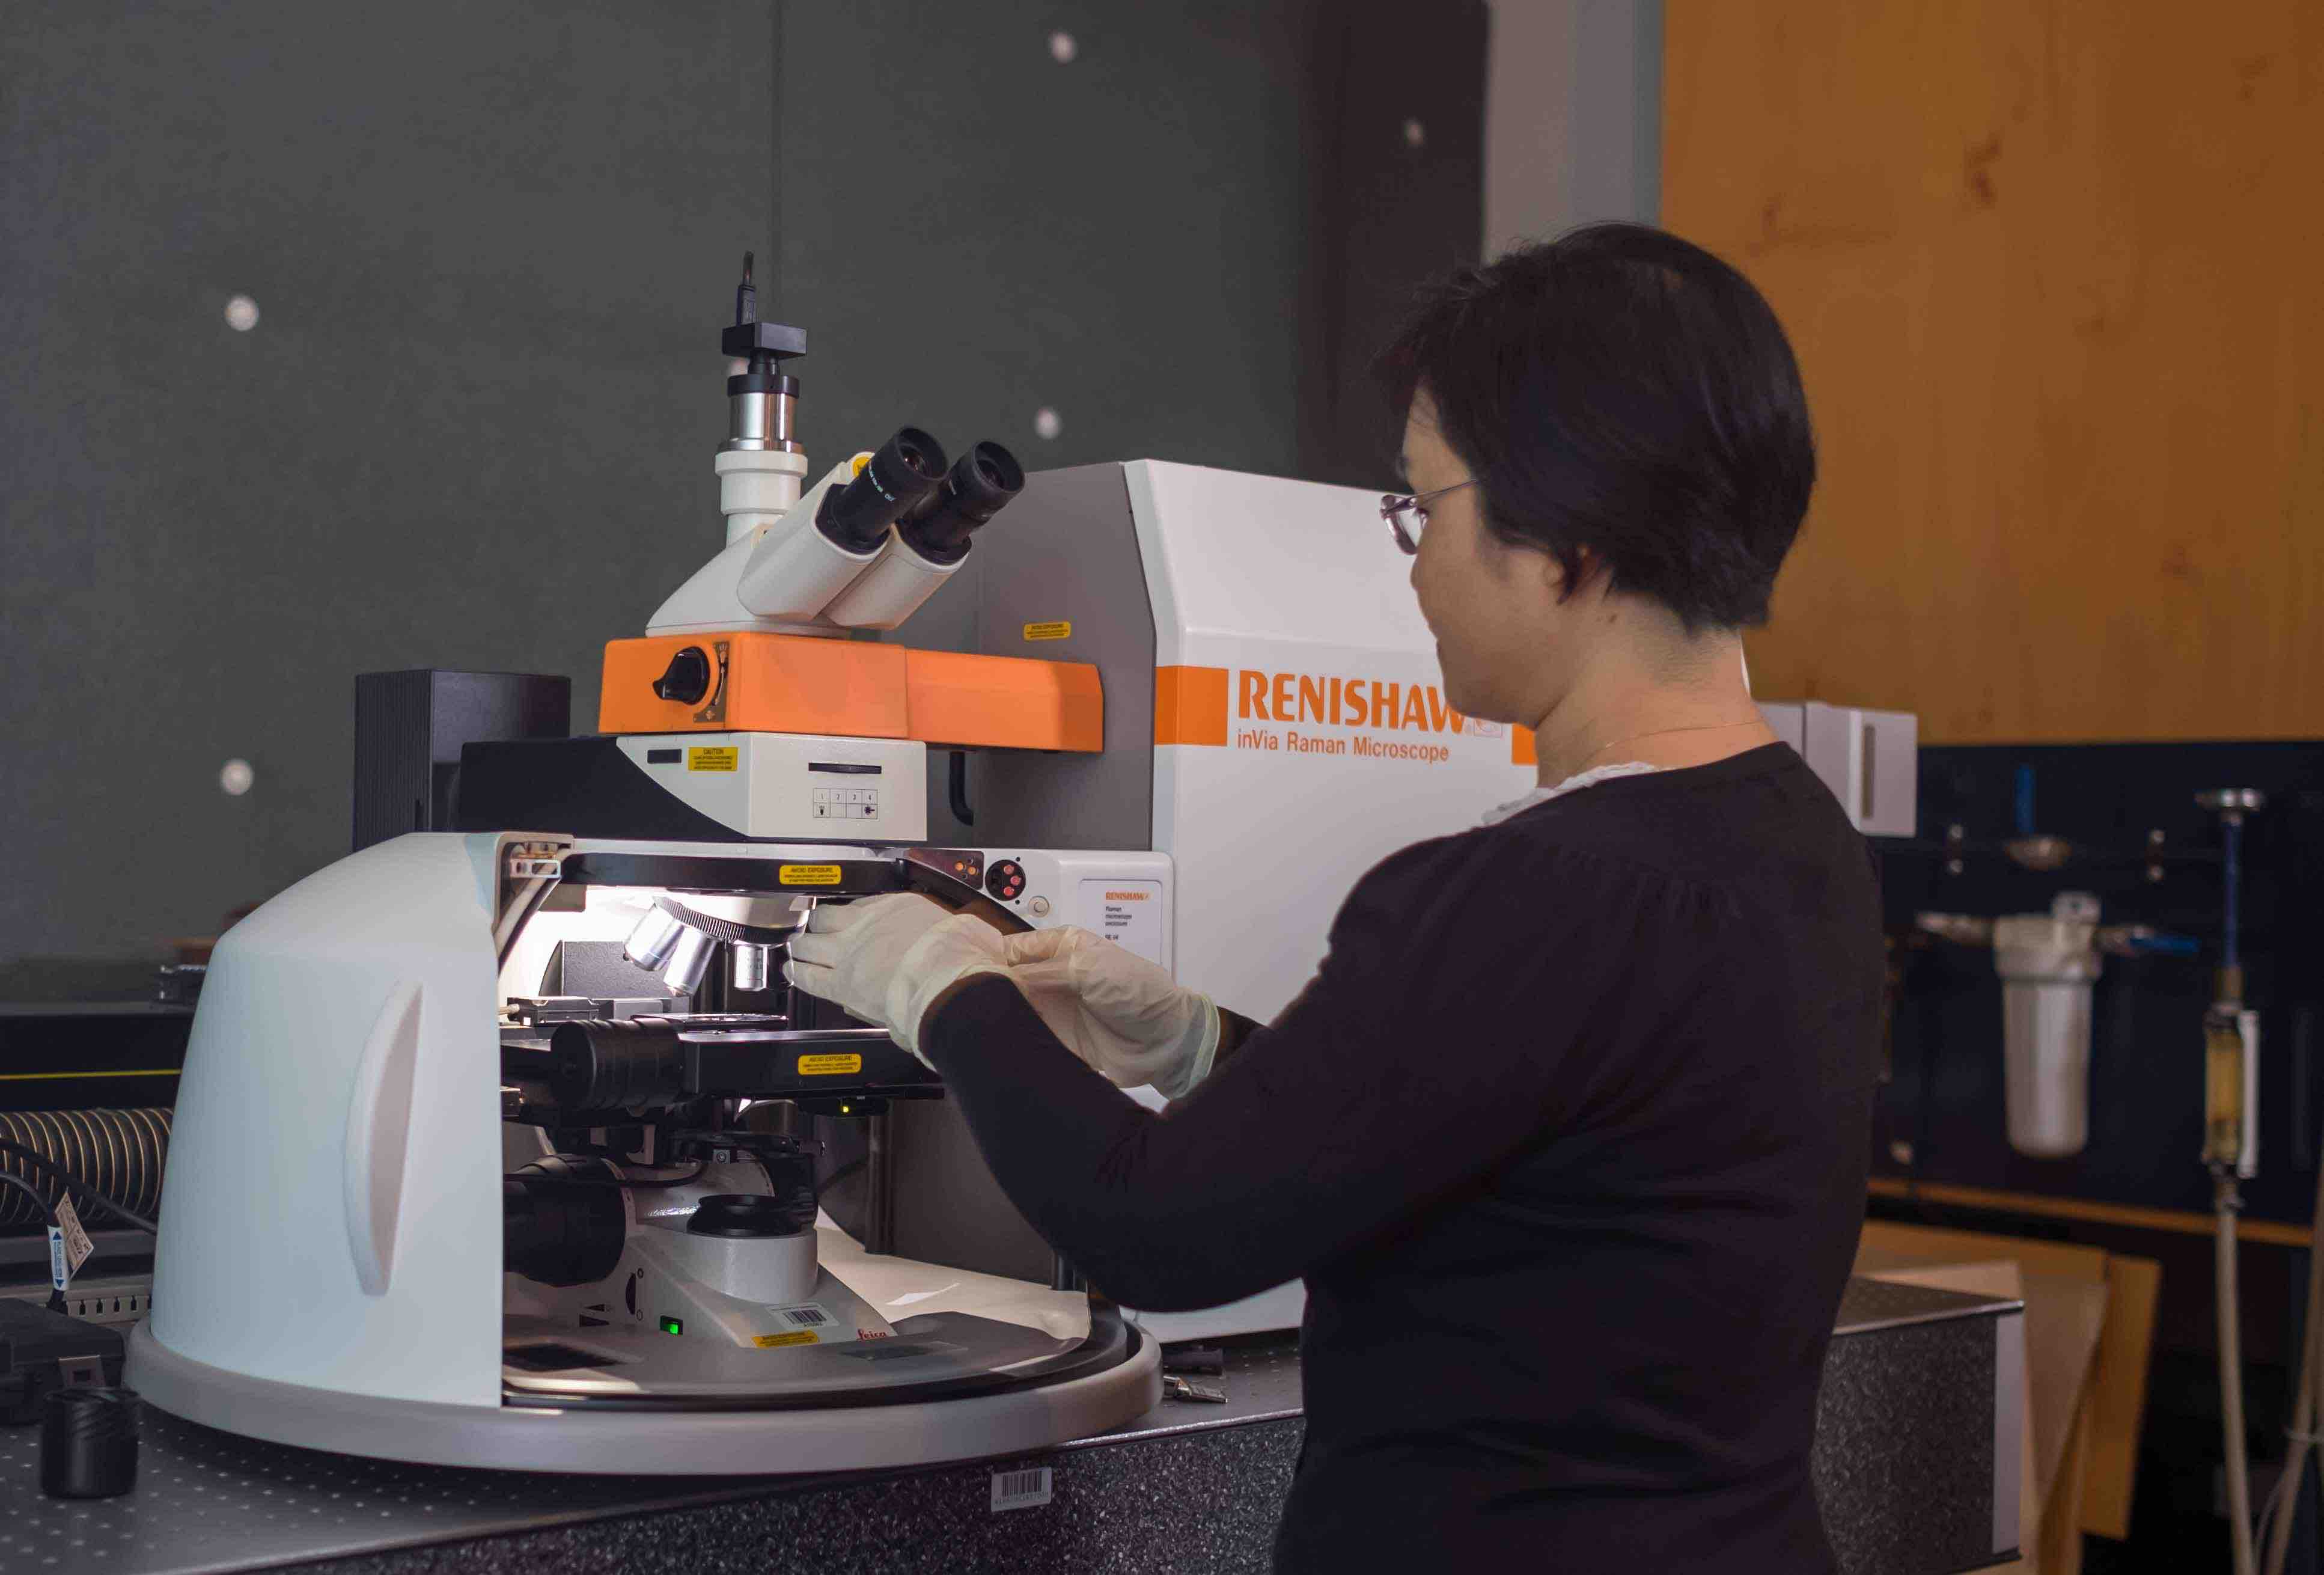 RENISHAW MICROSCOPE - Centre for Microscopy and Microanalysis - University of Queensland